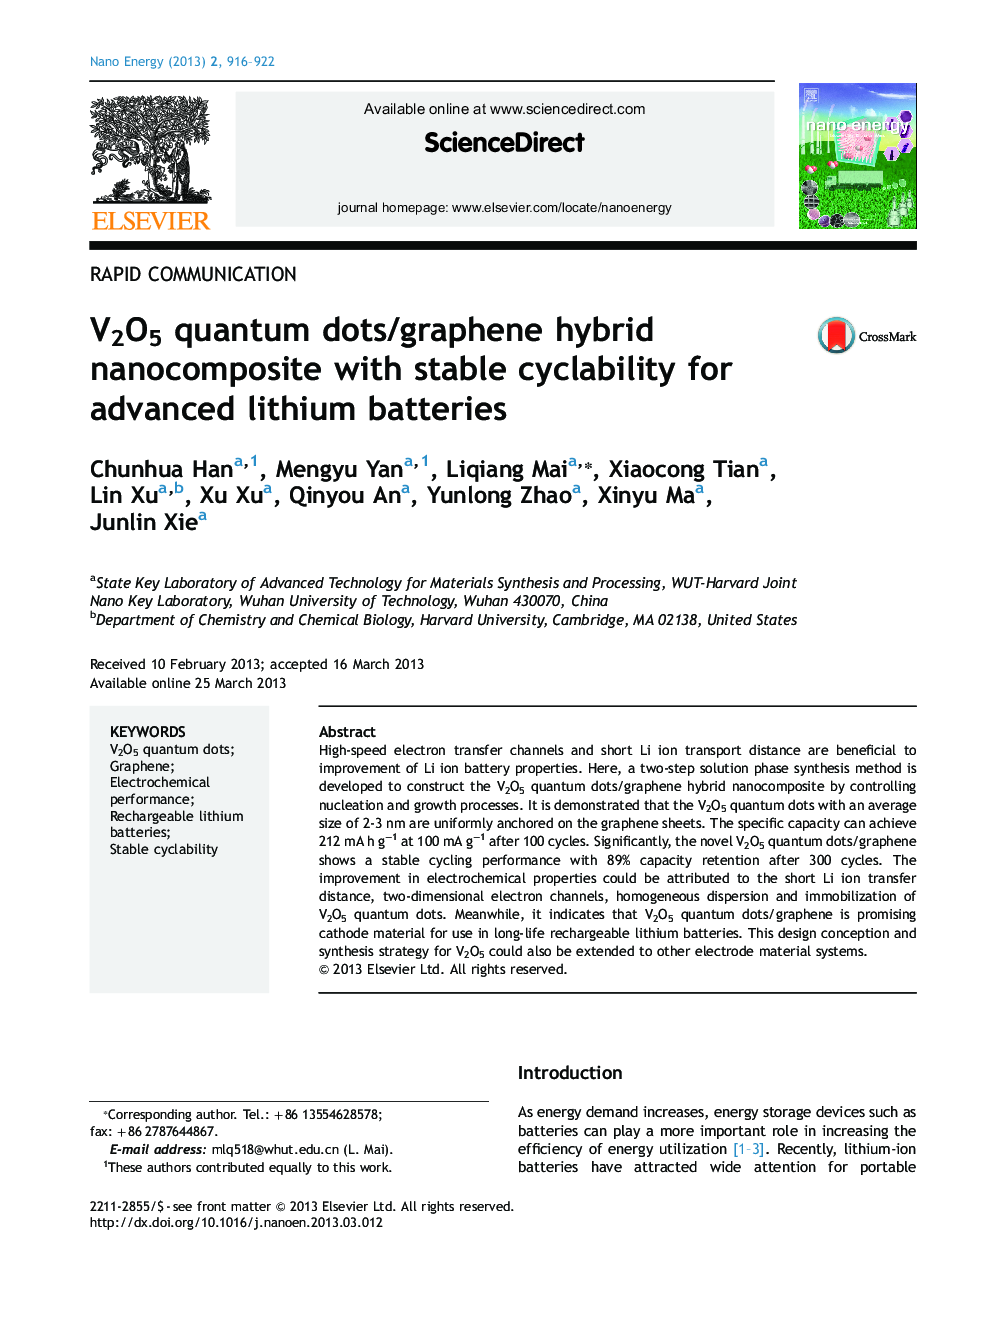 V2O5 quantum dots/graphene hybrid nanocomposite with stable cyclability for advanced lithium batteries